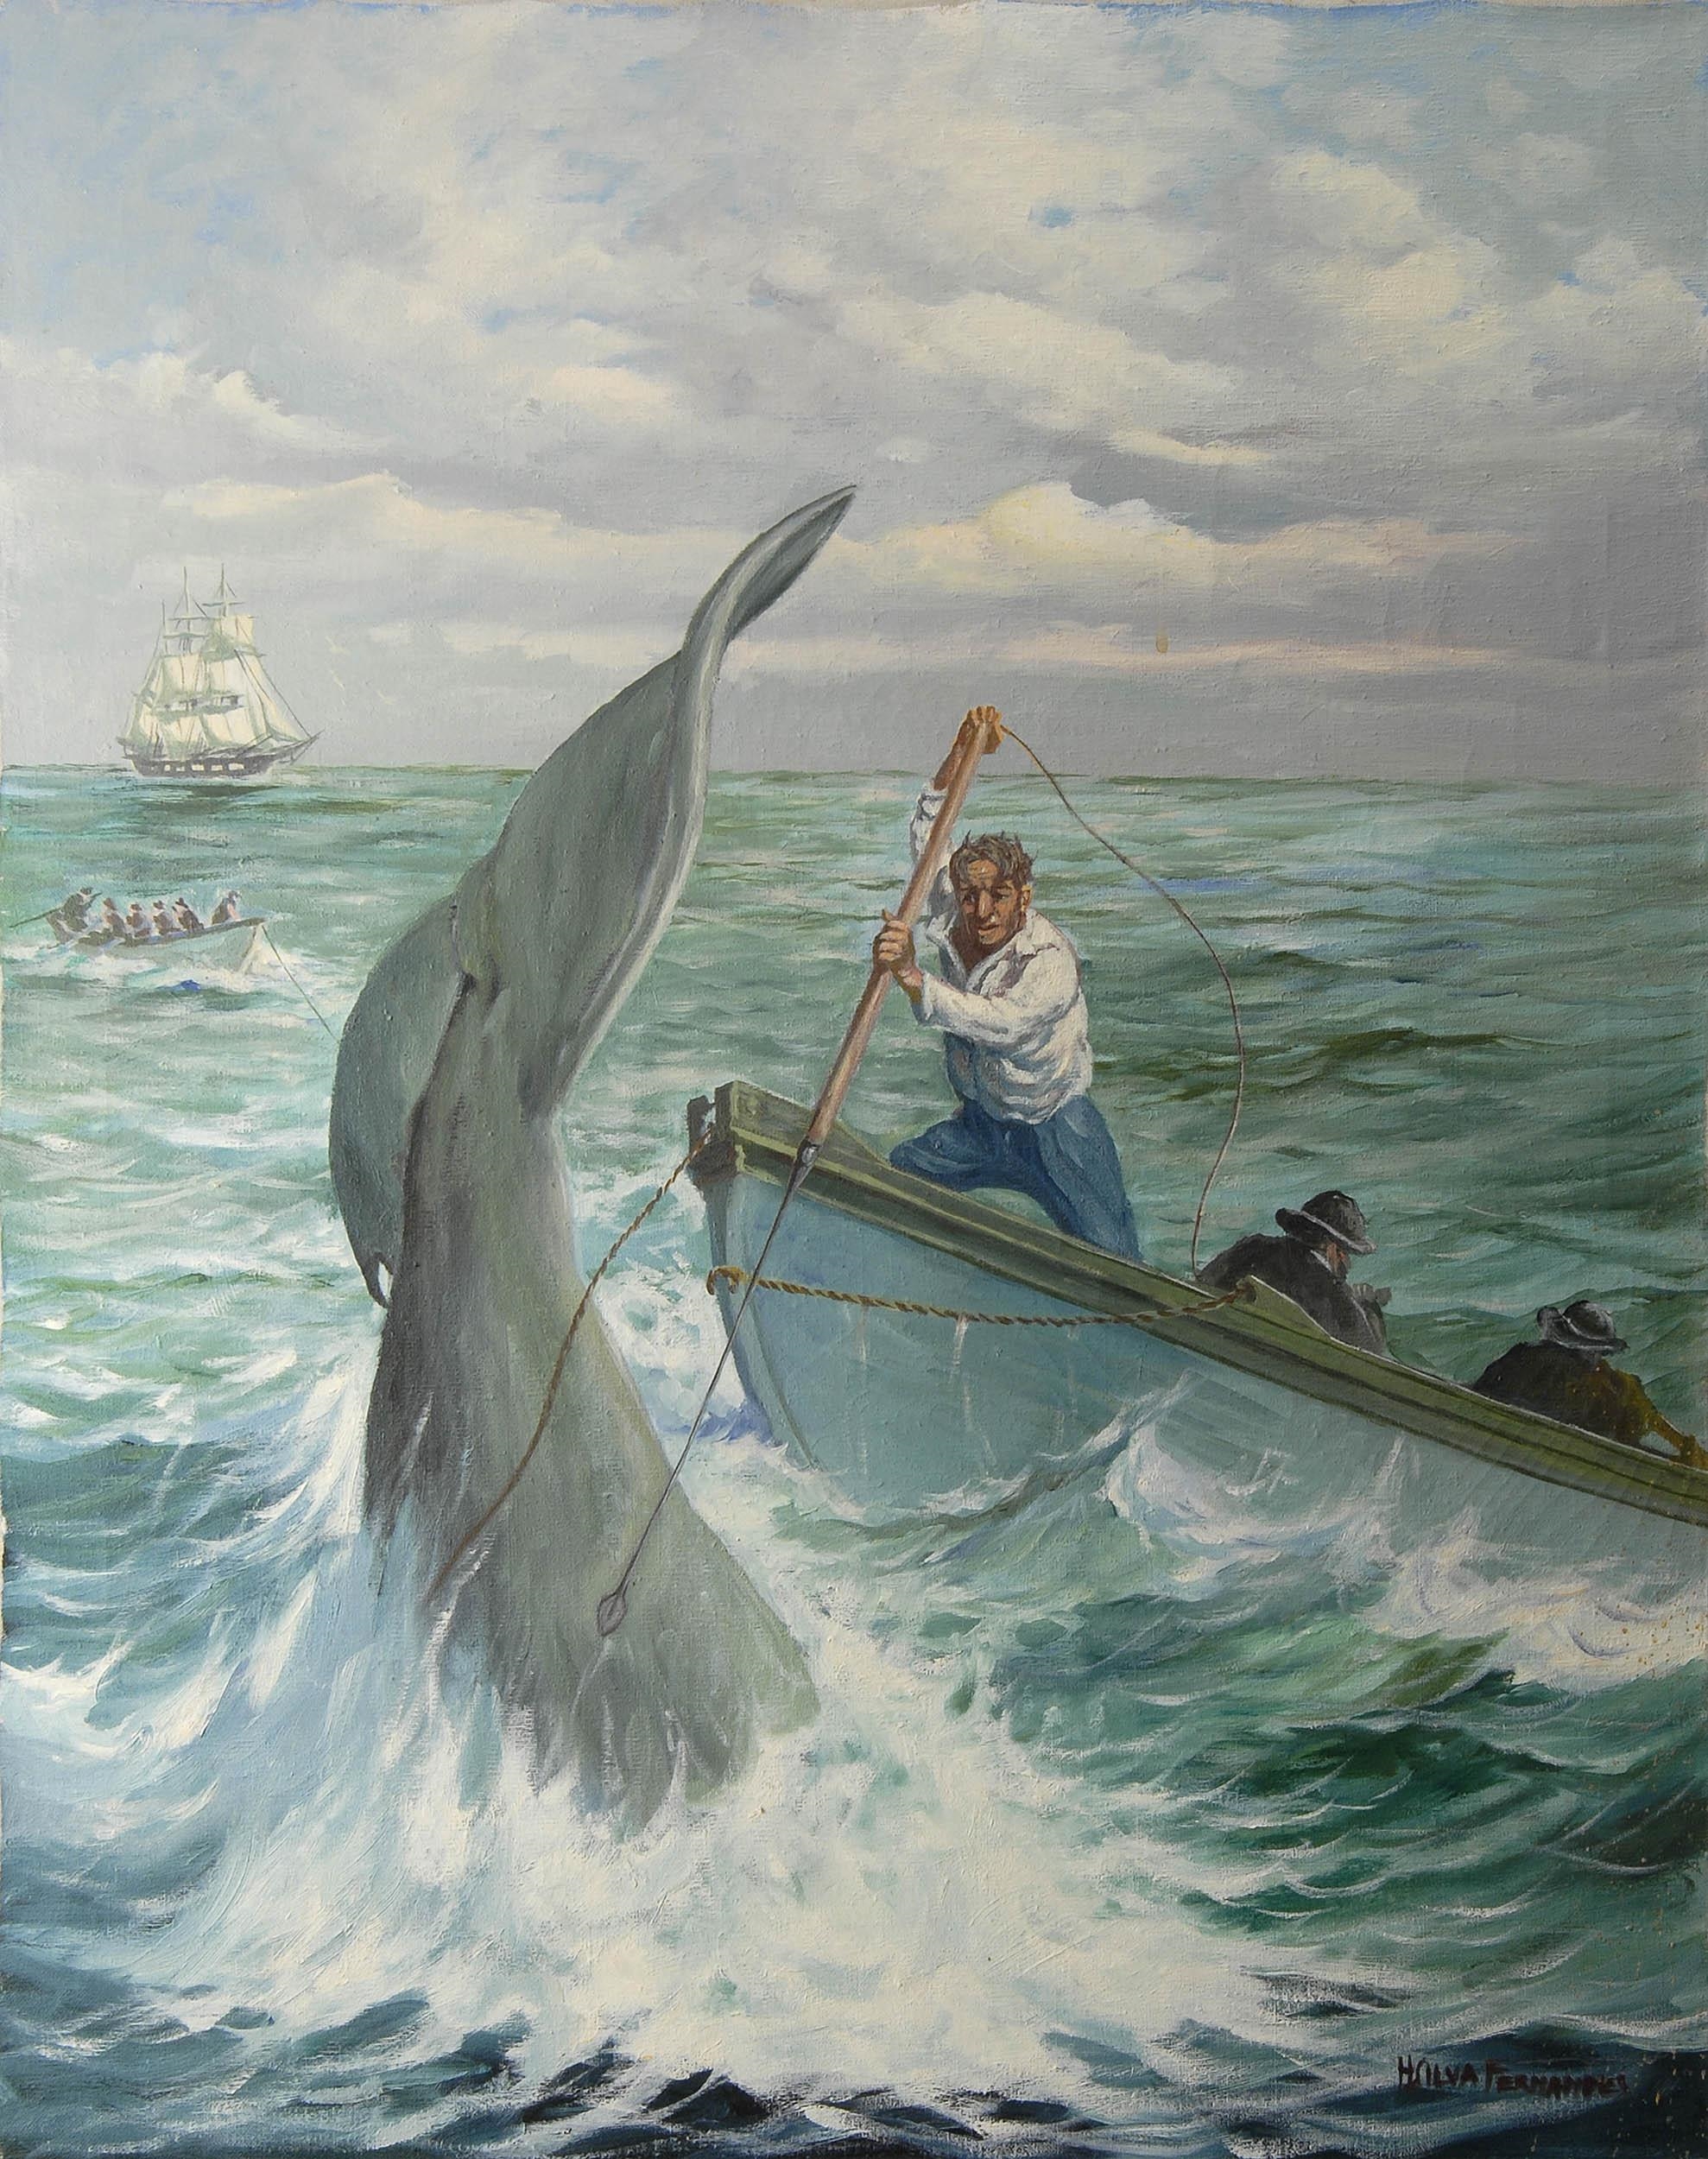 Artwork by H. Silva Fernandes, Depicting a whaleman harpooning a whale, Made of Oil on canvas